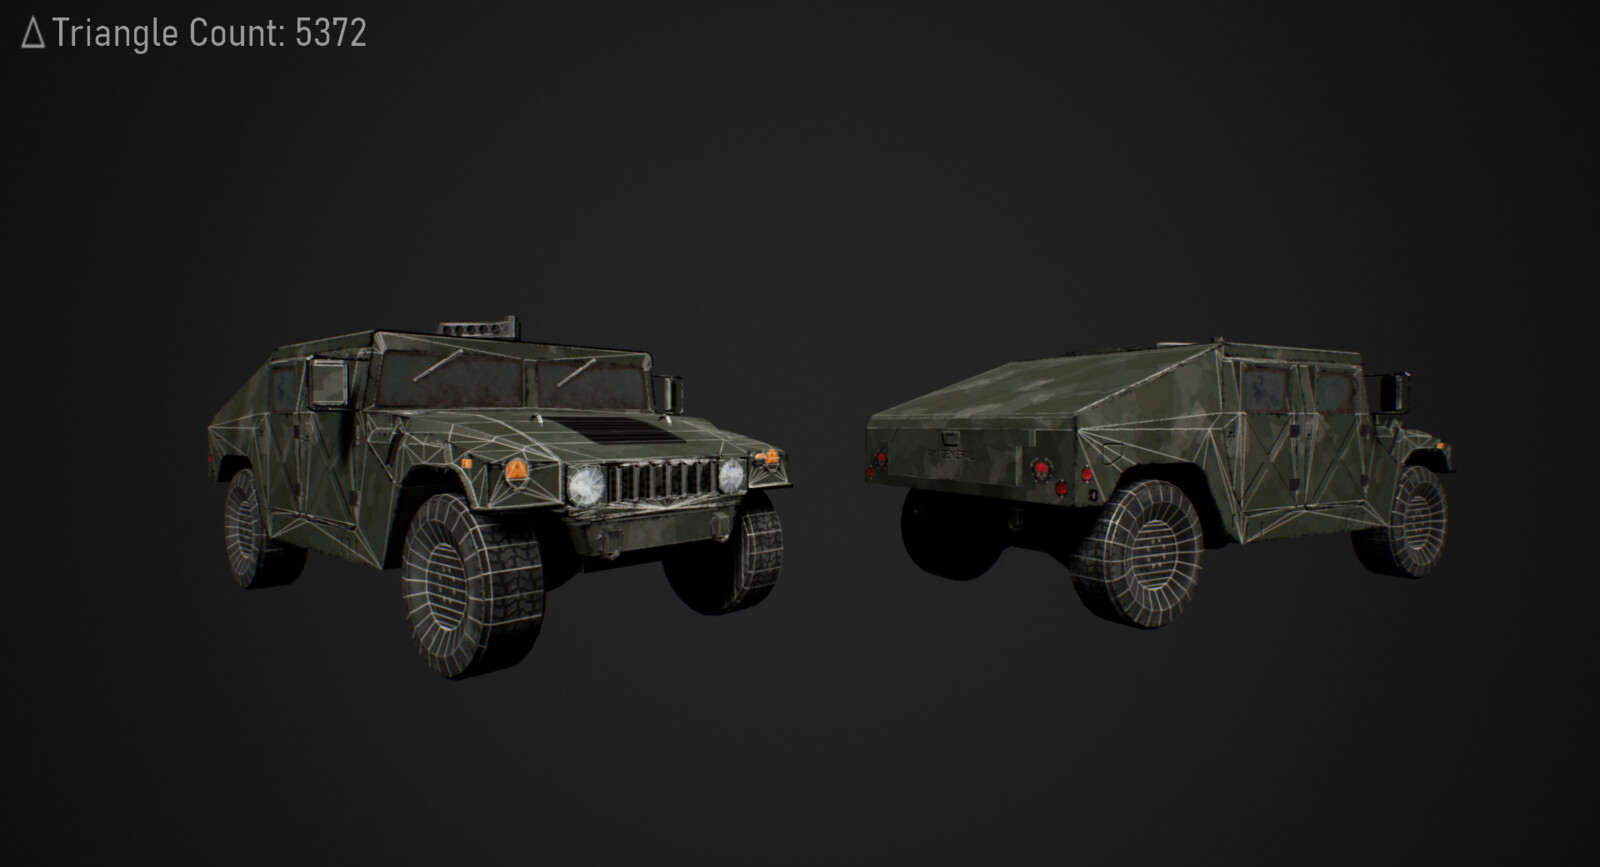 Wireframe and triangle count of the hero prop of the scene, a military humvee 